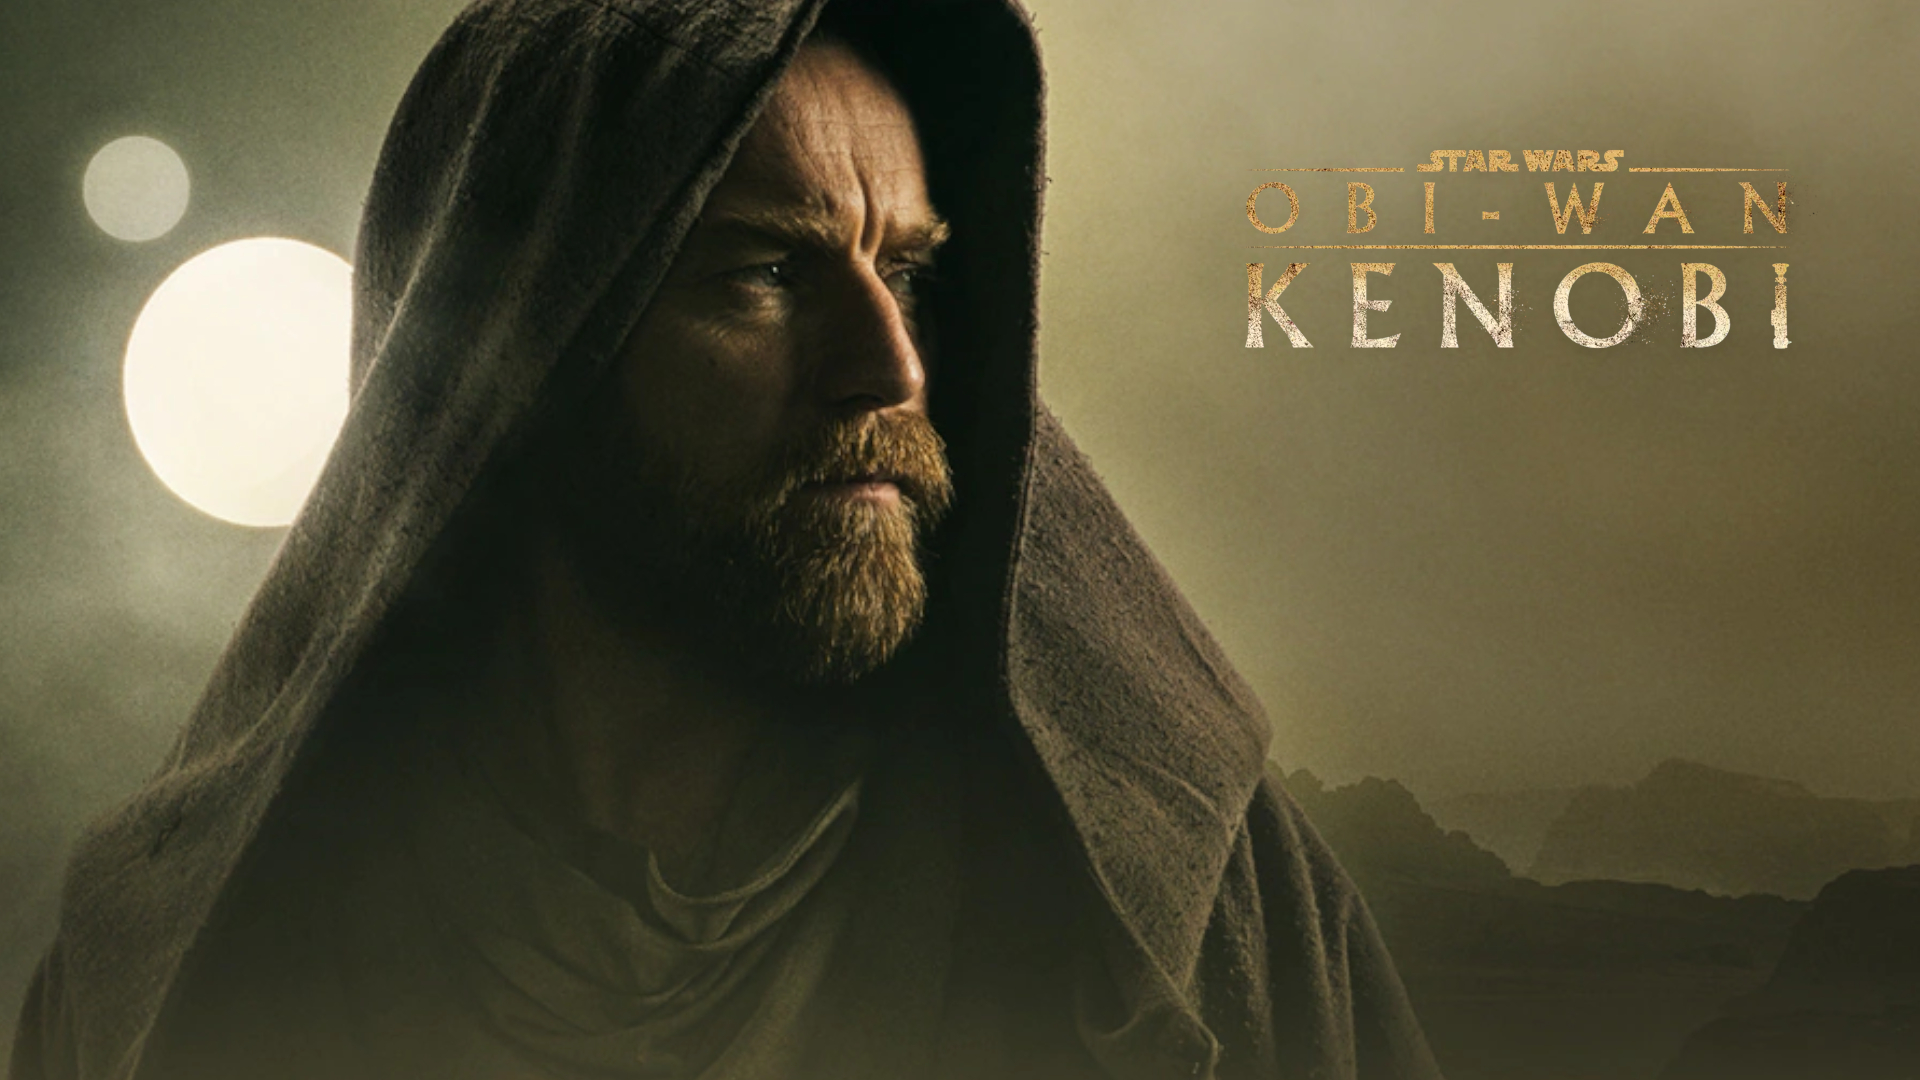 How To Watch Obi Wan Kenobi Online And Stream Two Episodes Of The Star Wars Show For Less